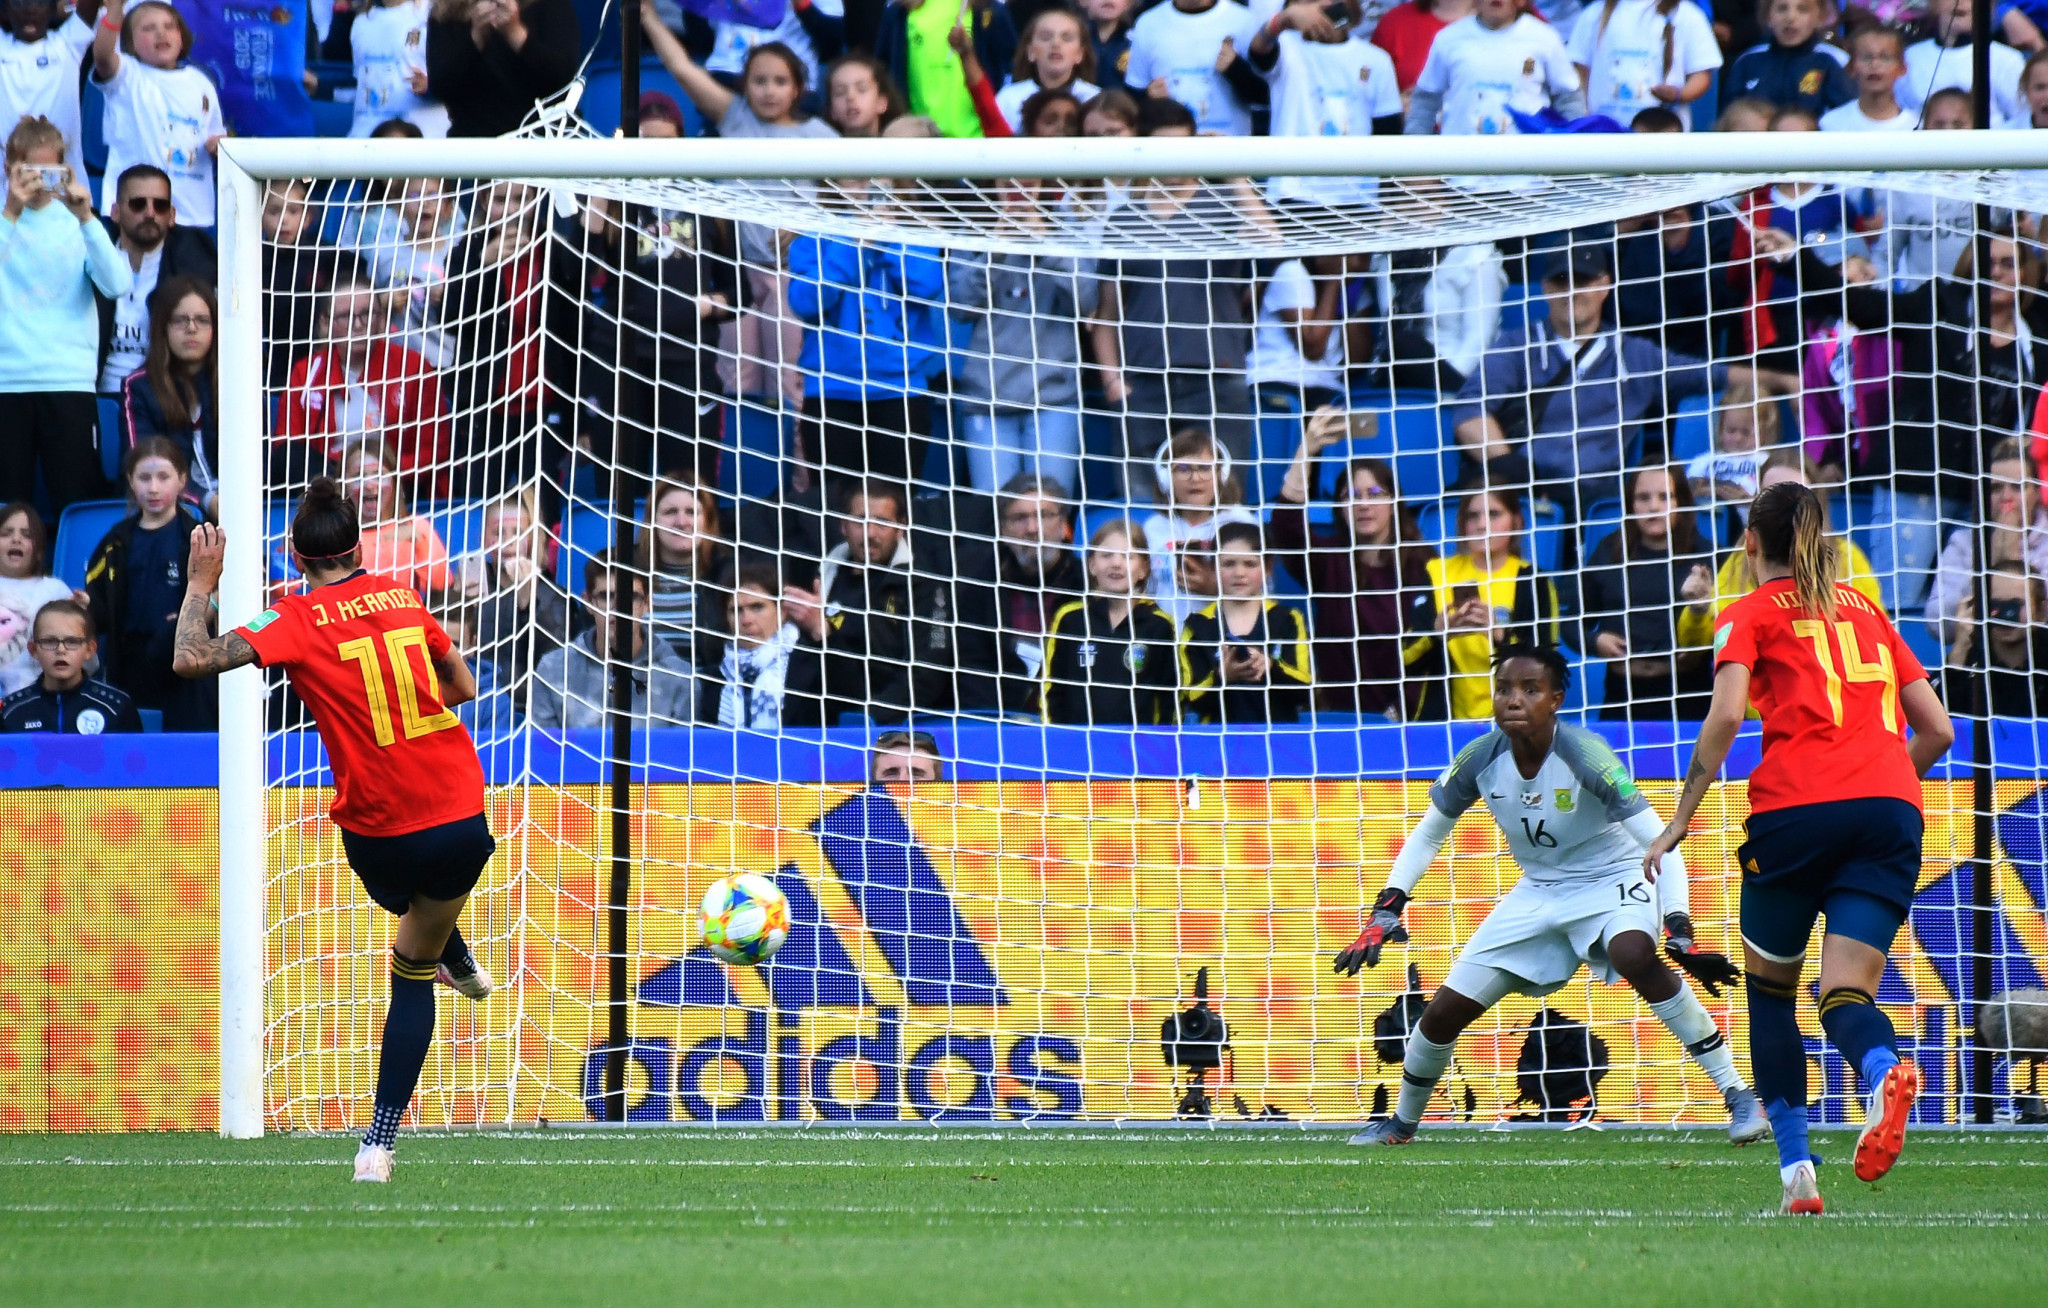 Jennifer Hermoso converted two penalties for Spain in the second half, however ©Getty Images